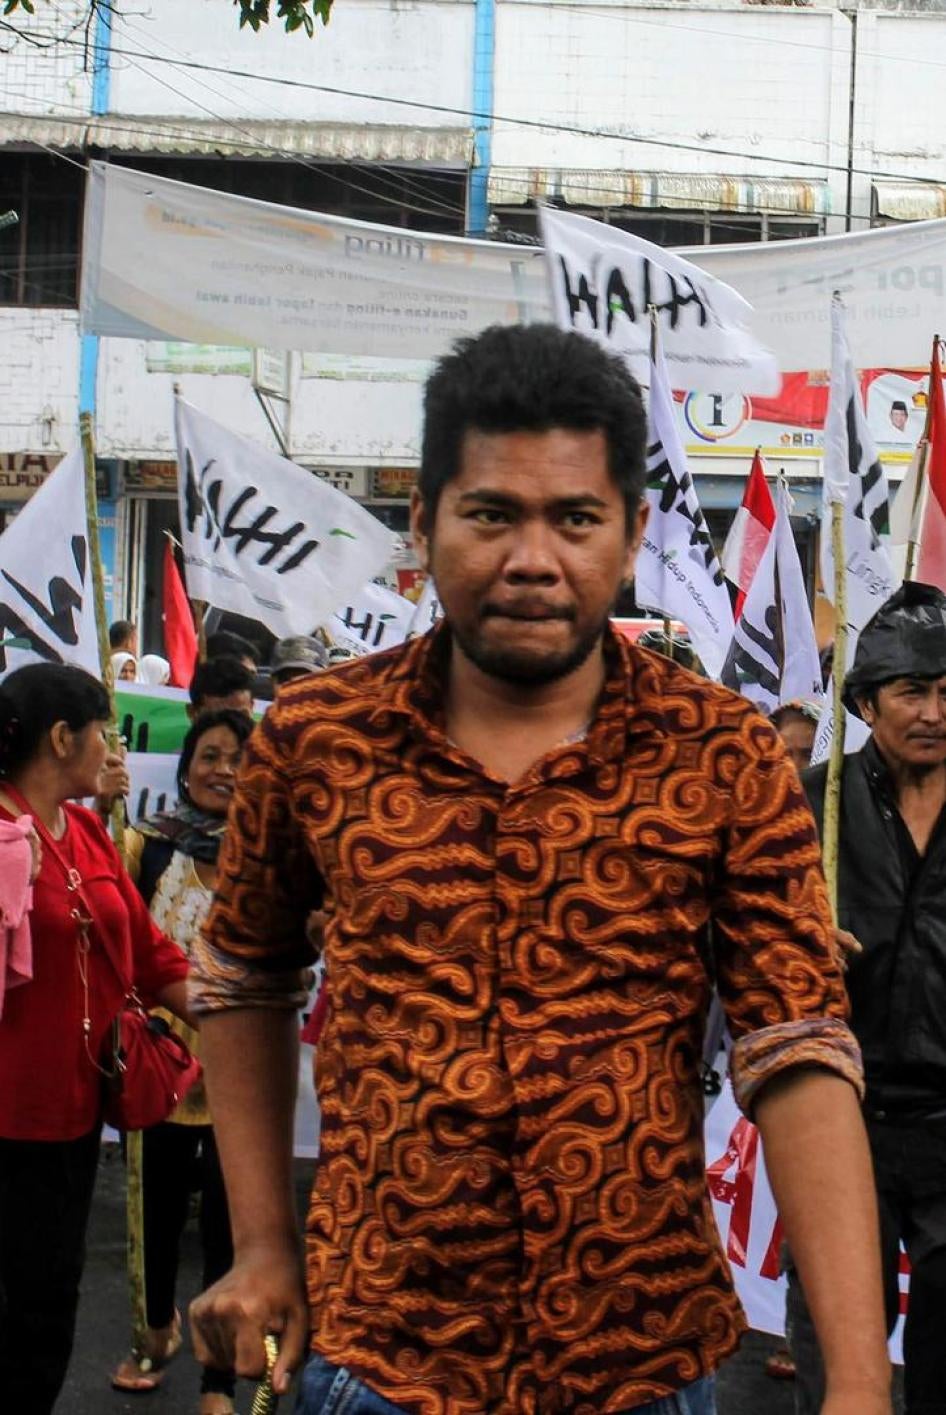 Golfrid Siregar (left),  an environmental lawyer, died on October 6, 2019 three days after his unconscious body was found in Medan, North Sumatra.  